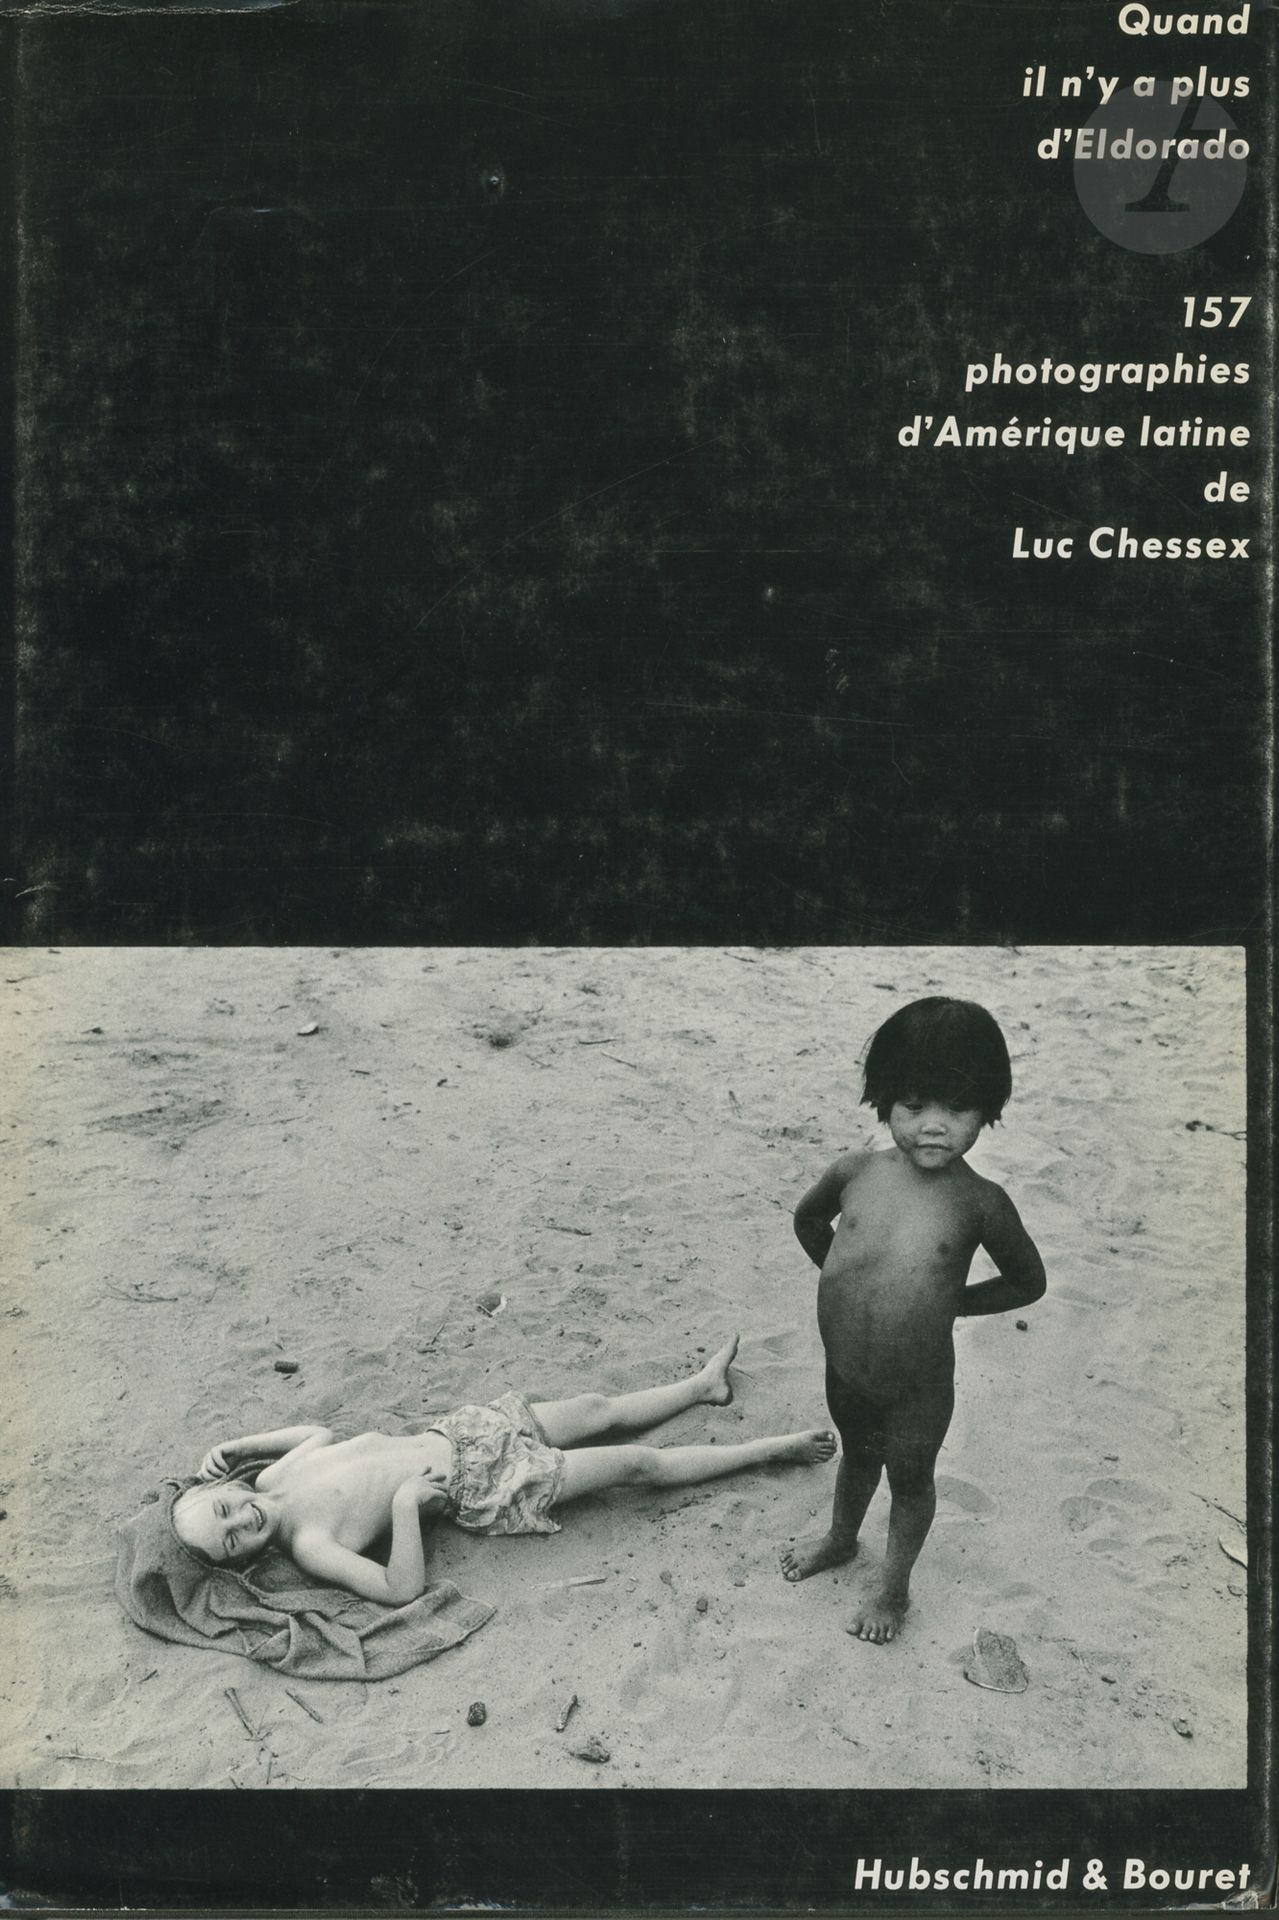 Null CHESSEX, LUC (1936) [Signed]
Quand il n’y a plus d’Eldorado.
157 photograph&hellip;